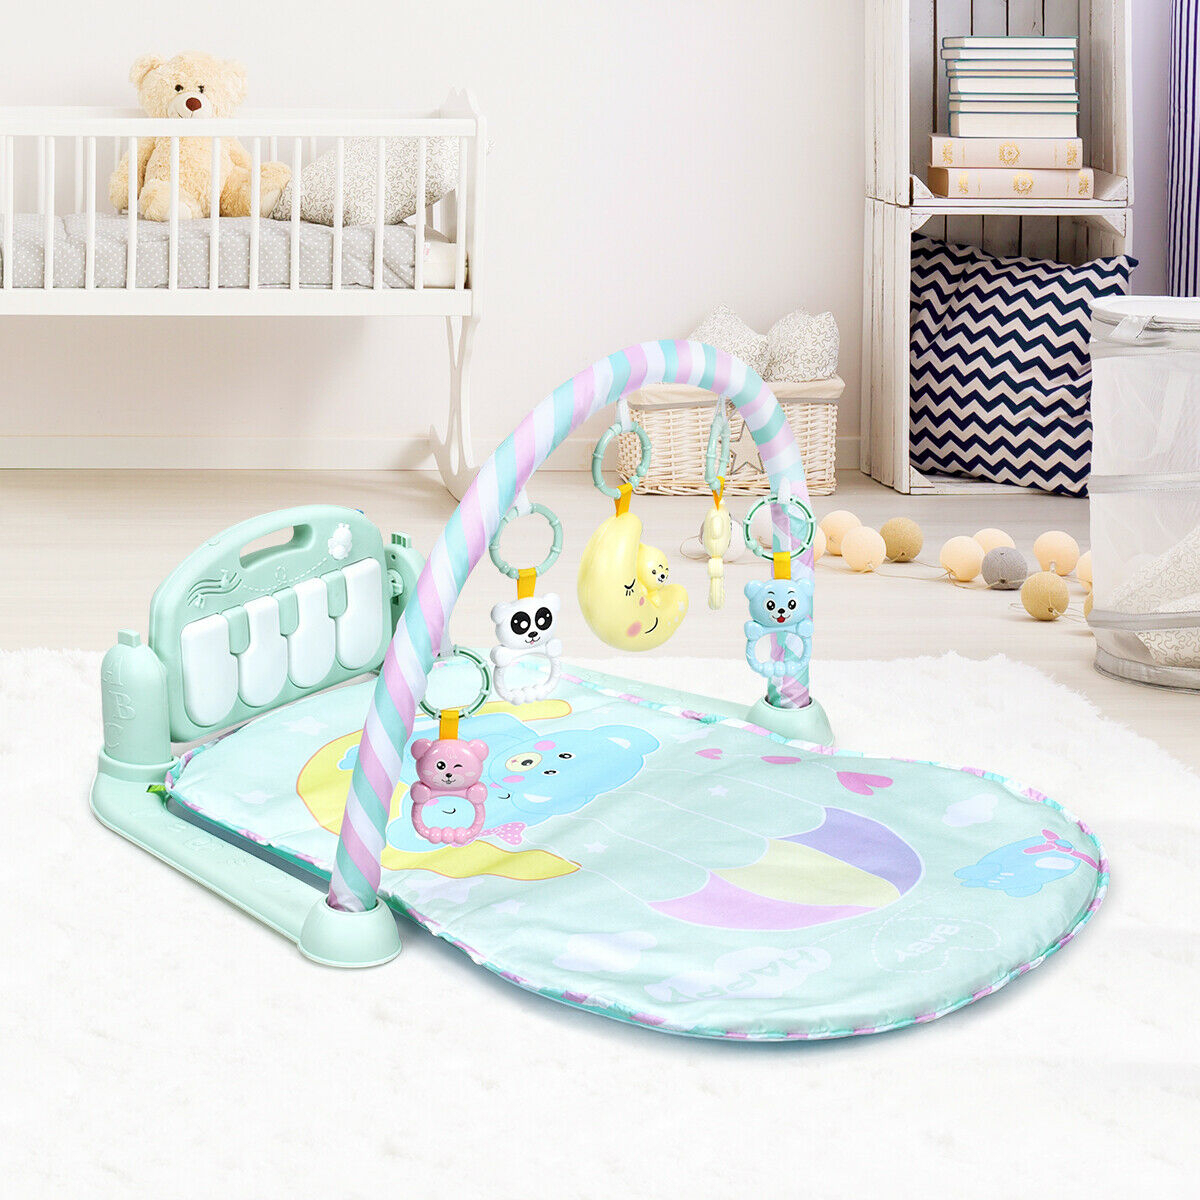 Baby Gym Play Mat 3 In 1 Fitness Music And Lights Fun Piano Activity Center Toys